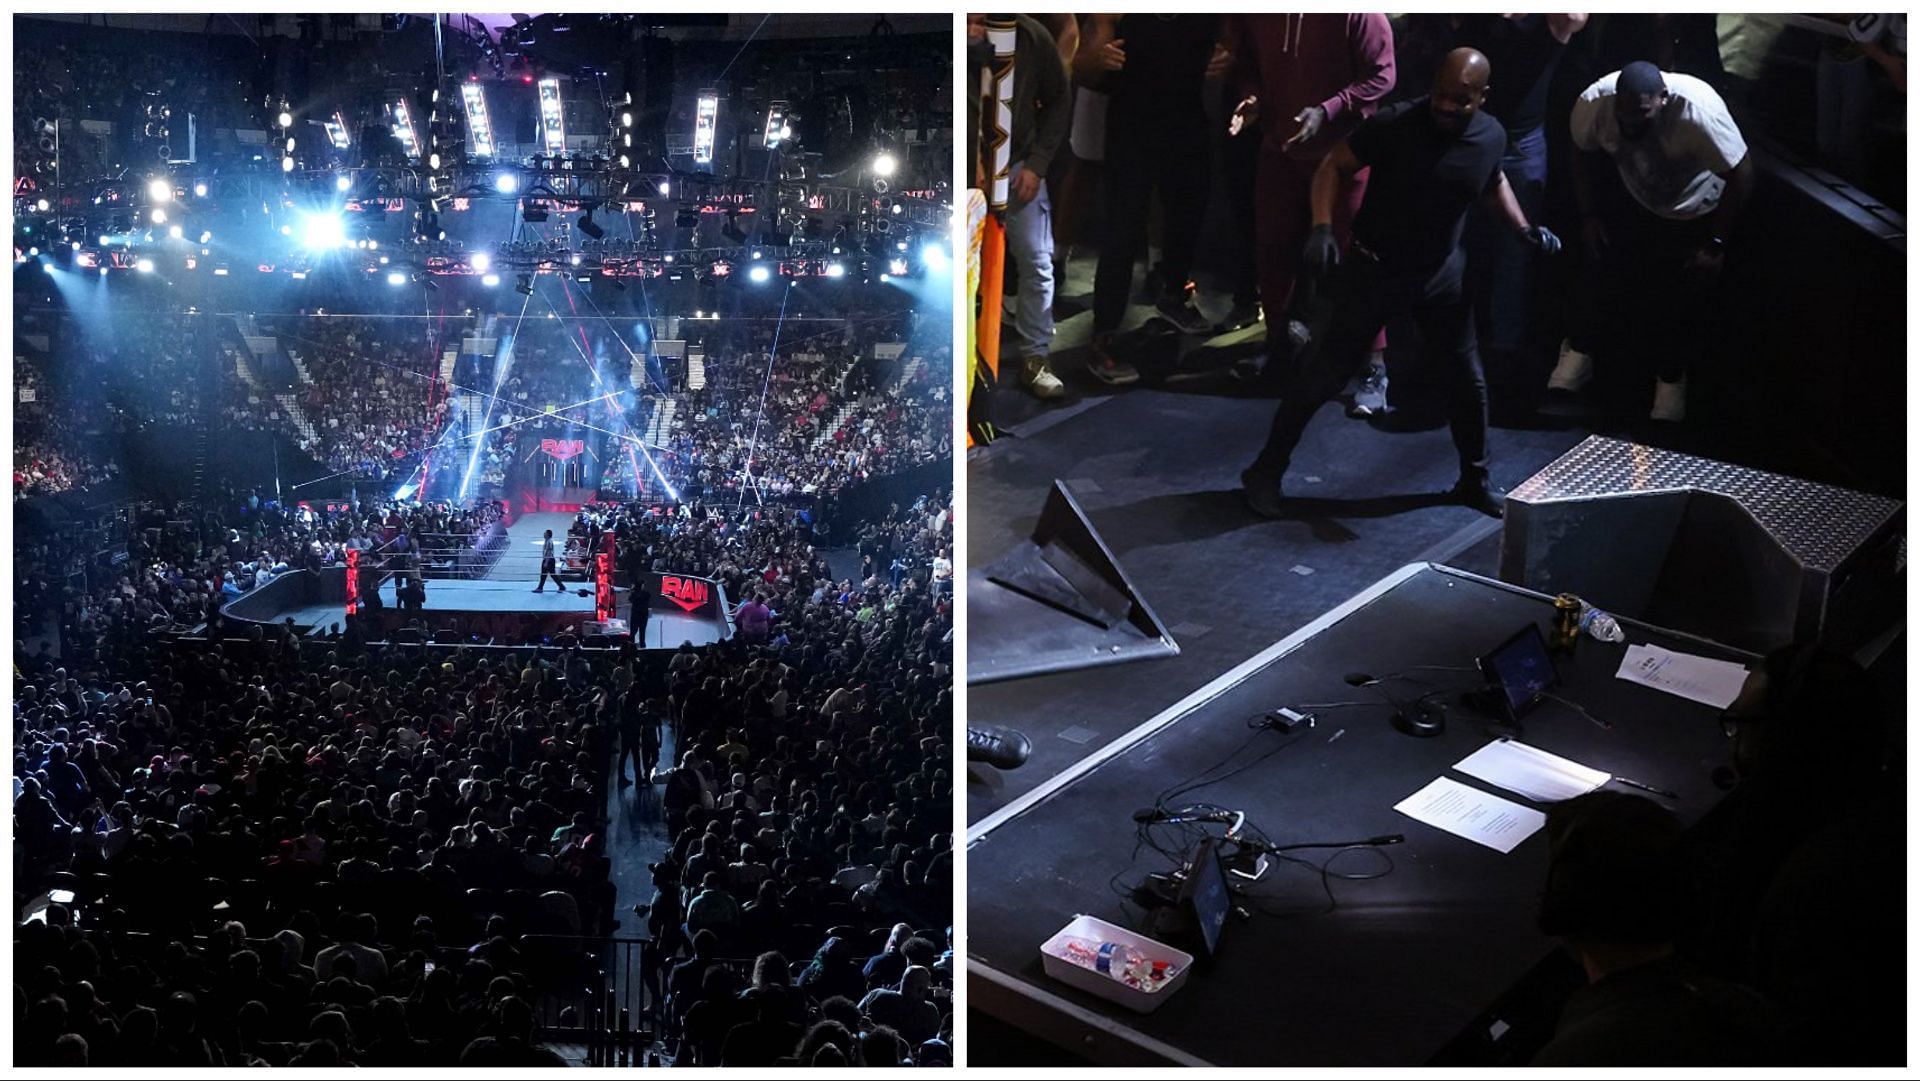 The Wells Fargo Center is packed for WWE RAW, the NXT Underground concept in action